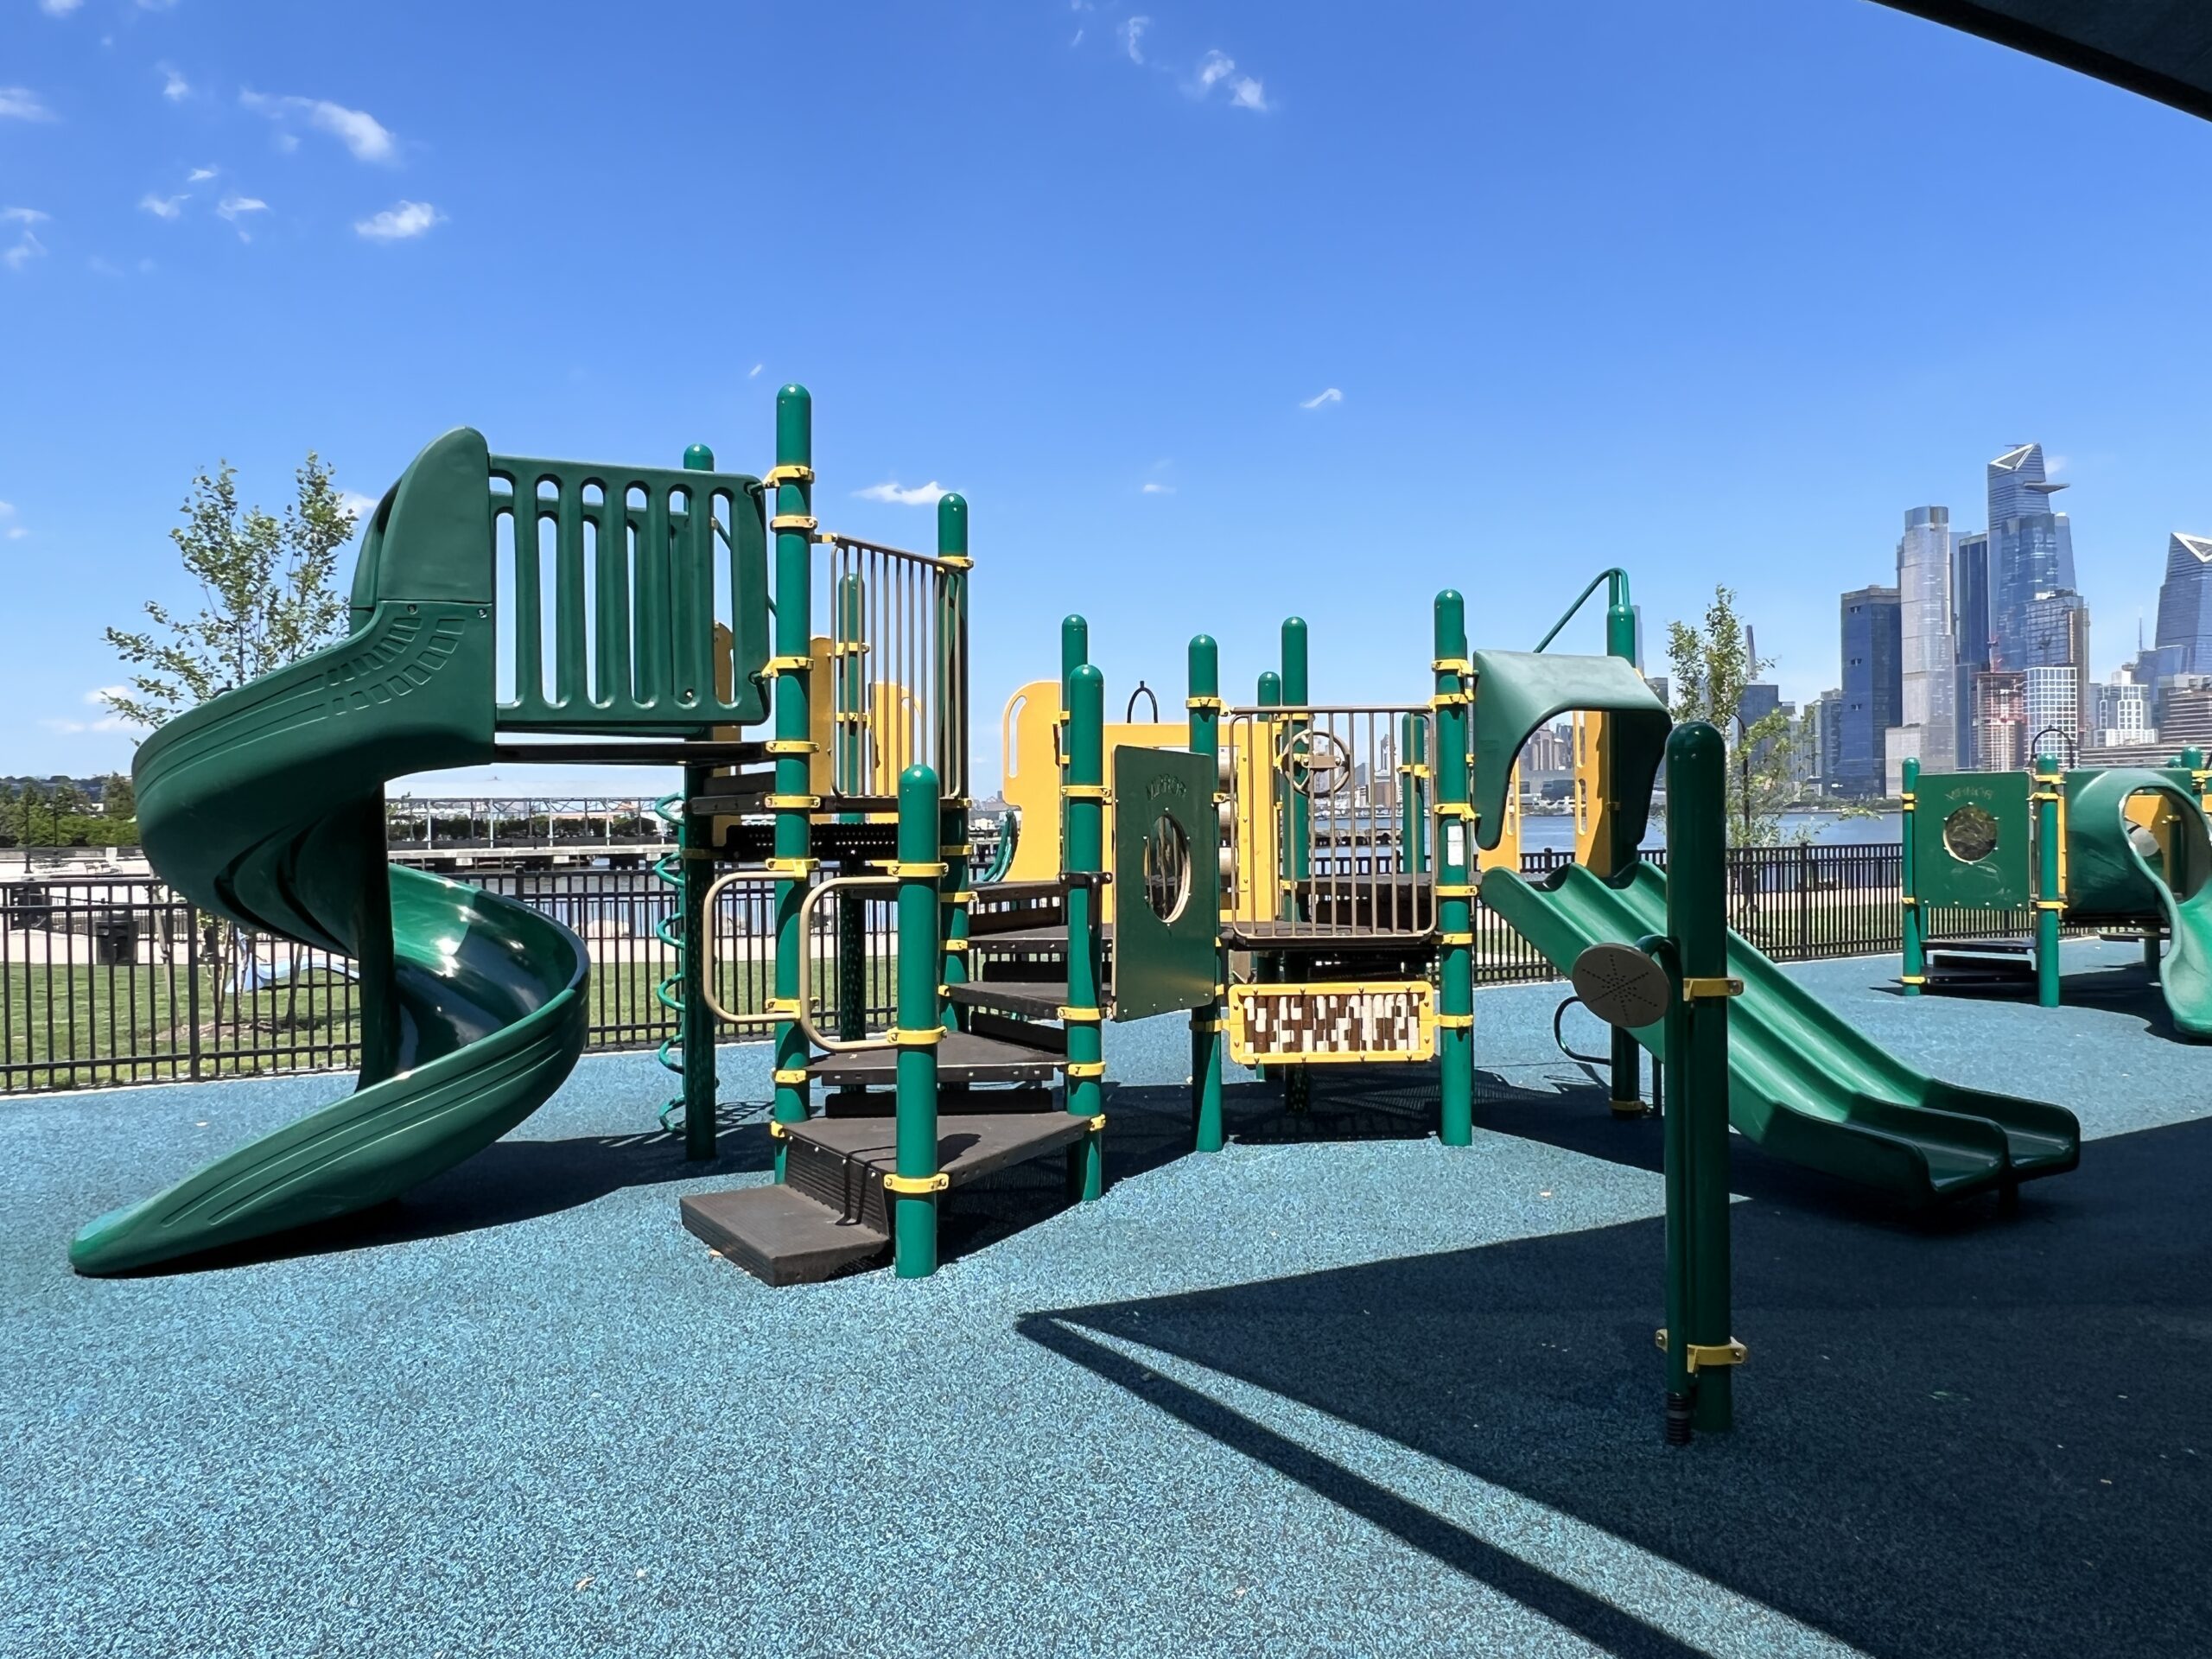 Maxwell Place Park Playground in Hoboken NJ - WIDE image - first playground structure front side view